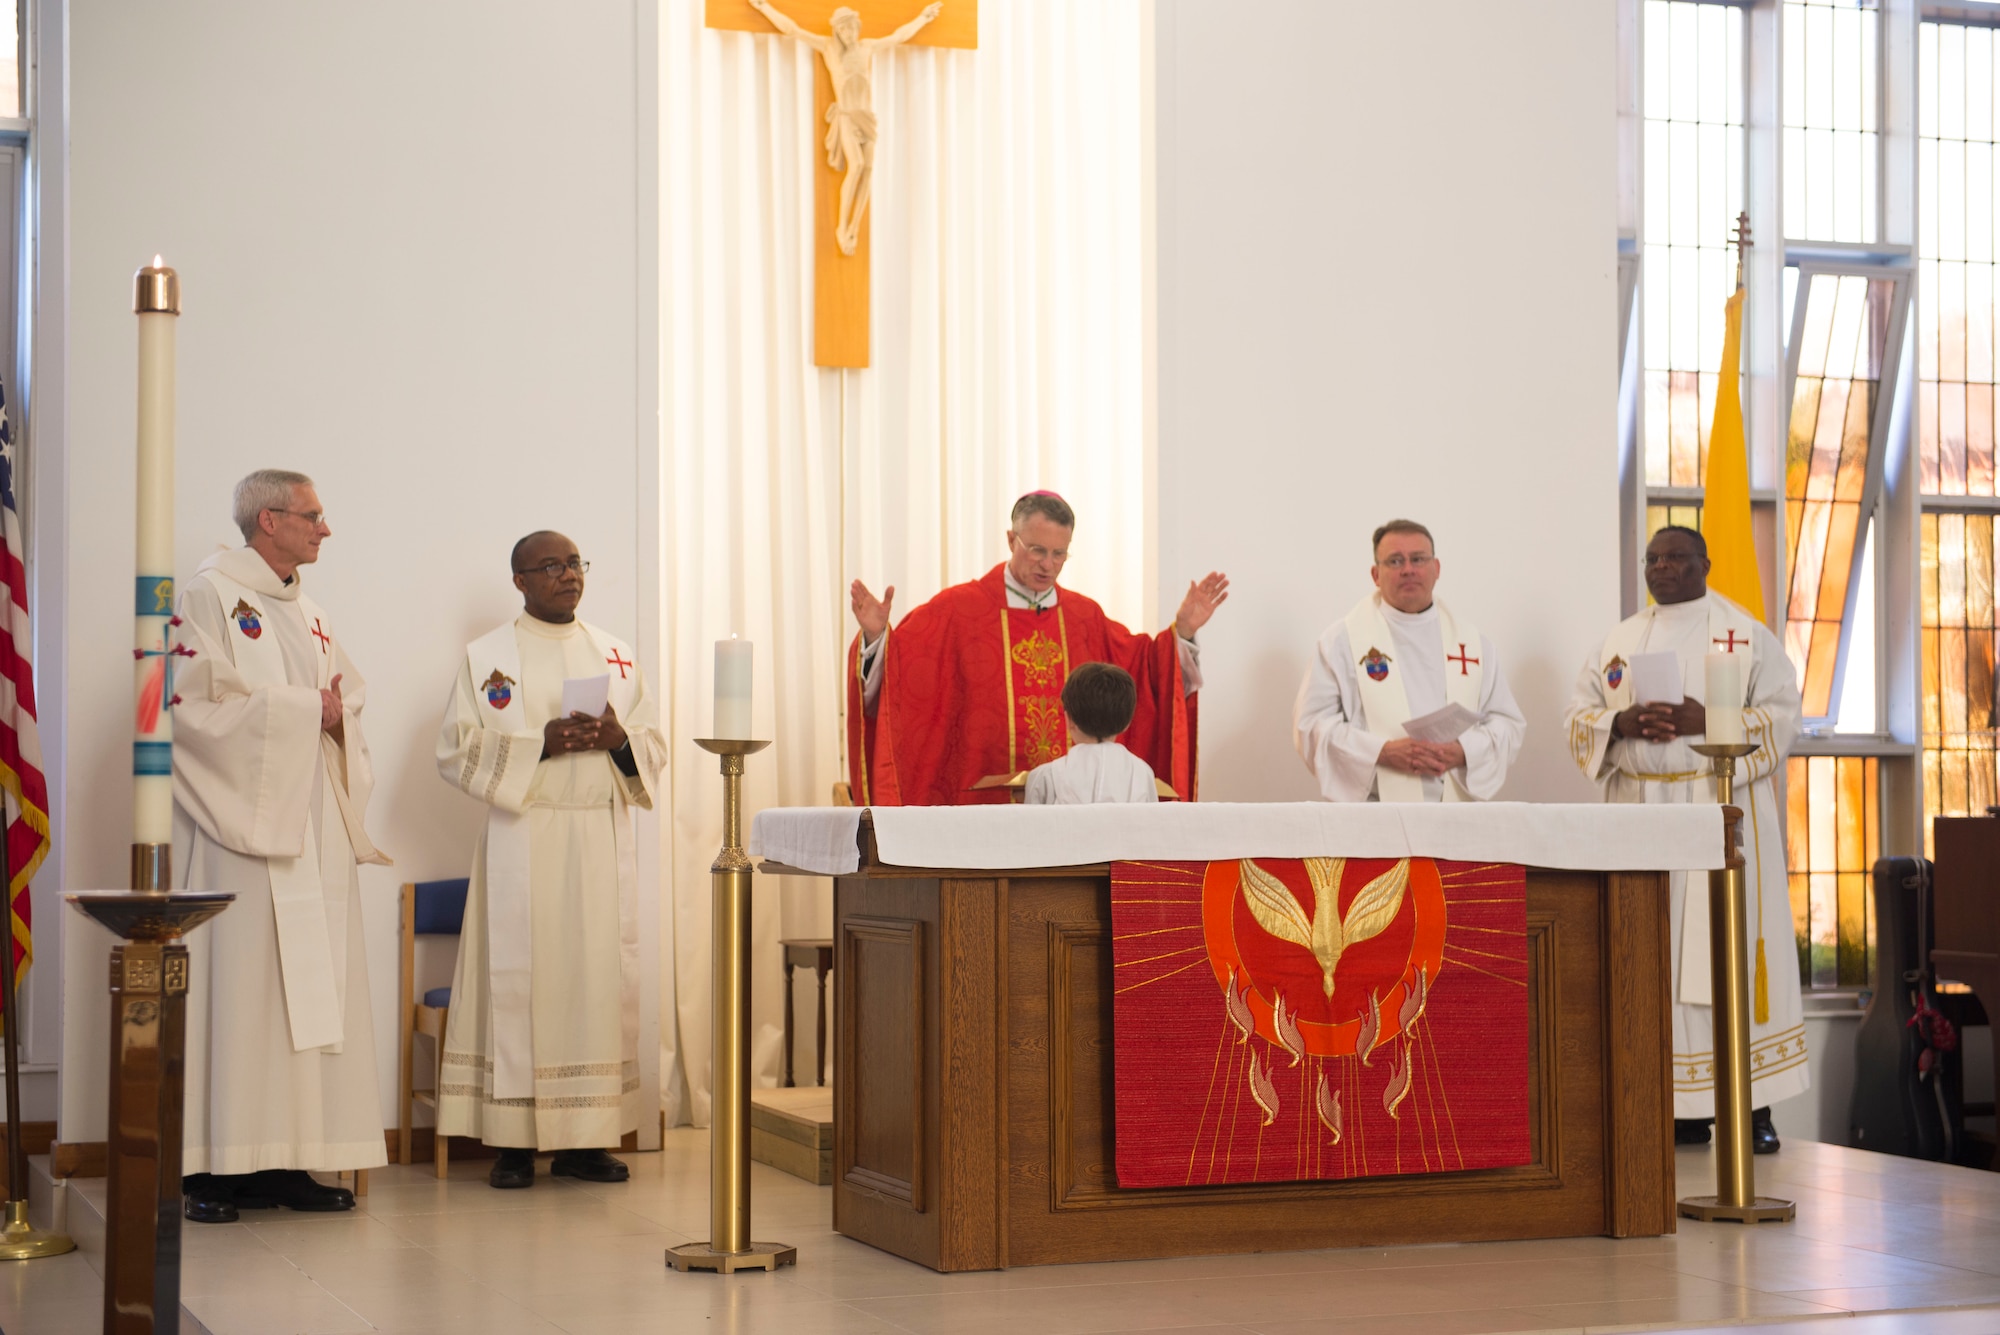 Members of the U.S.military chapel leadership stand for the reading of the Bible during the final Catholic mass at RAF Mildenhall, England, May 14, 2018. The Catholic Parish falls under Our Lady of Walsingham Catholic Community, and has been a part of RAF Mildenhall since 1955. (U.S. Air Force photo by Airman 1st Class Alexandria Lee)